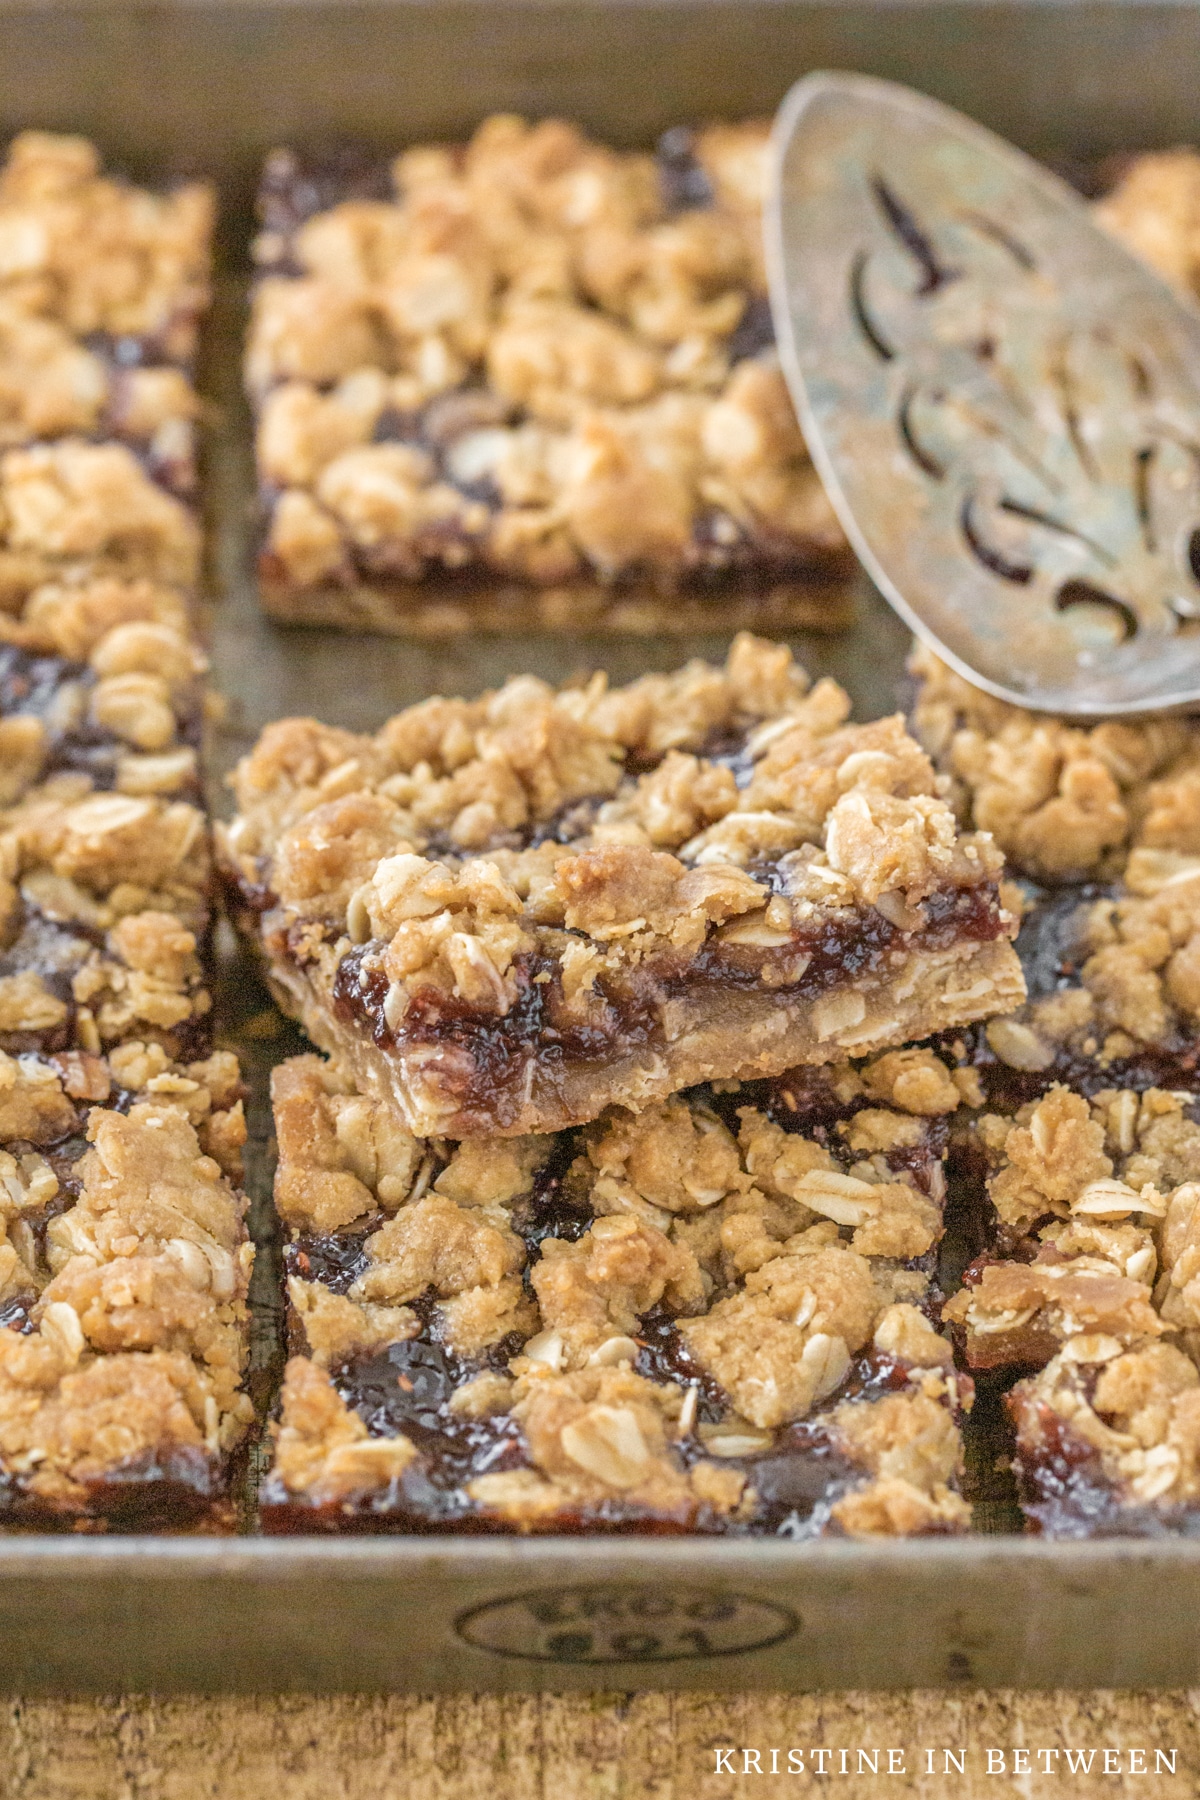 Raspberry jam crumble bars sitting in an antique baking pan with an old spatula.